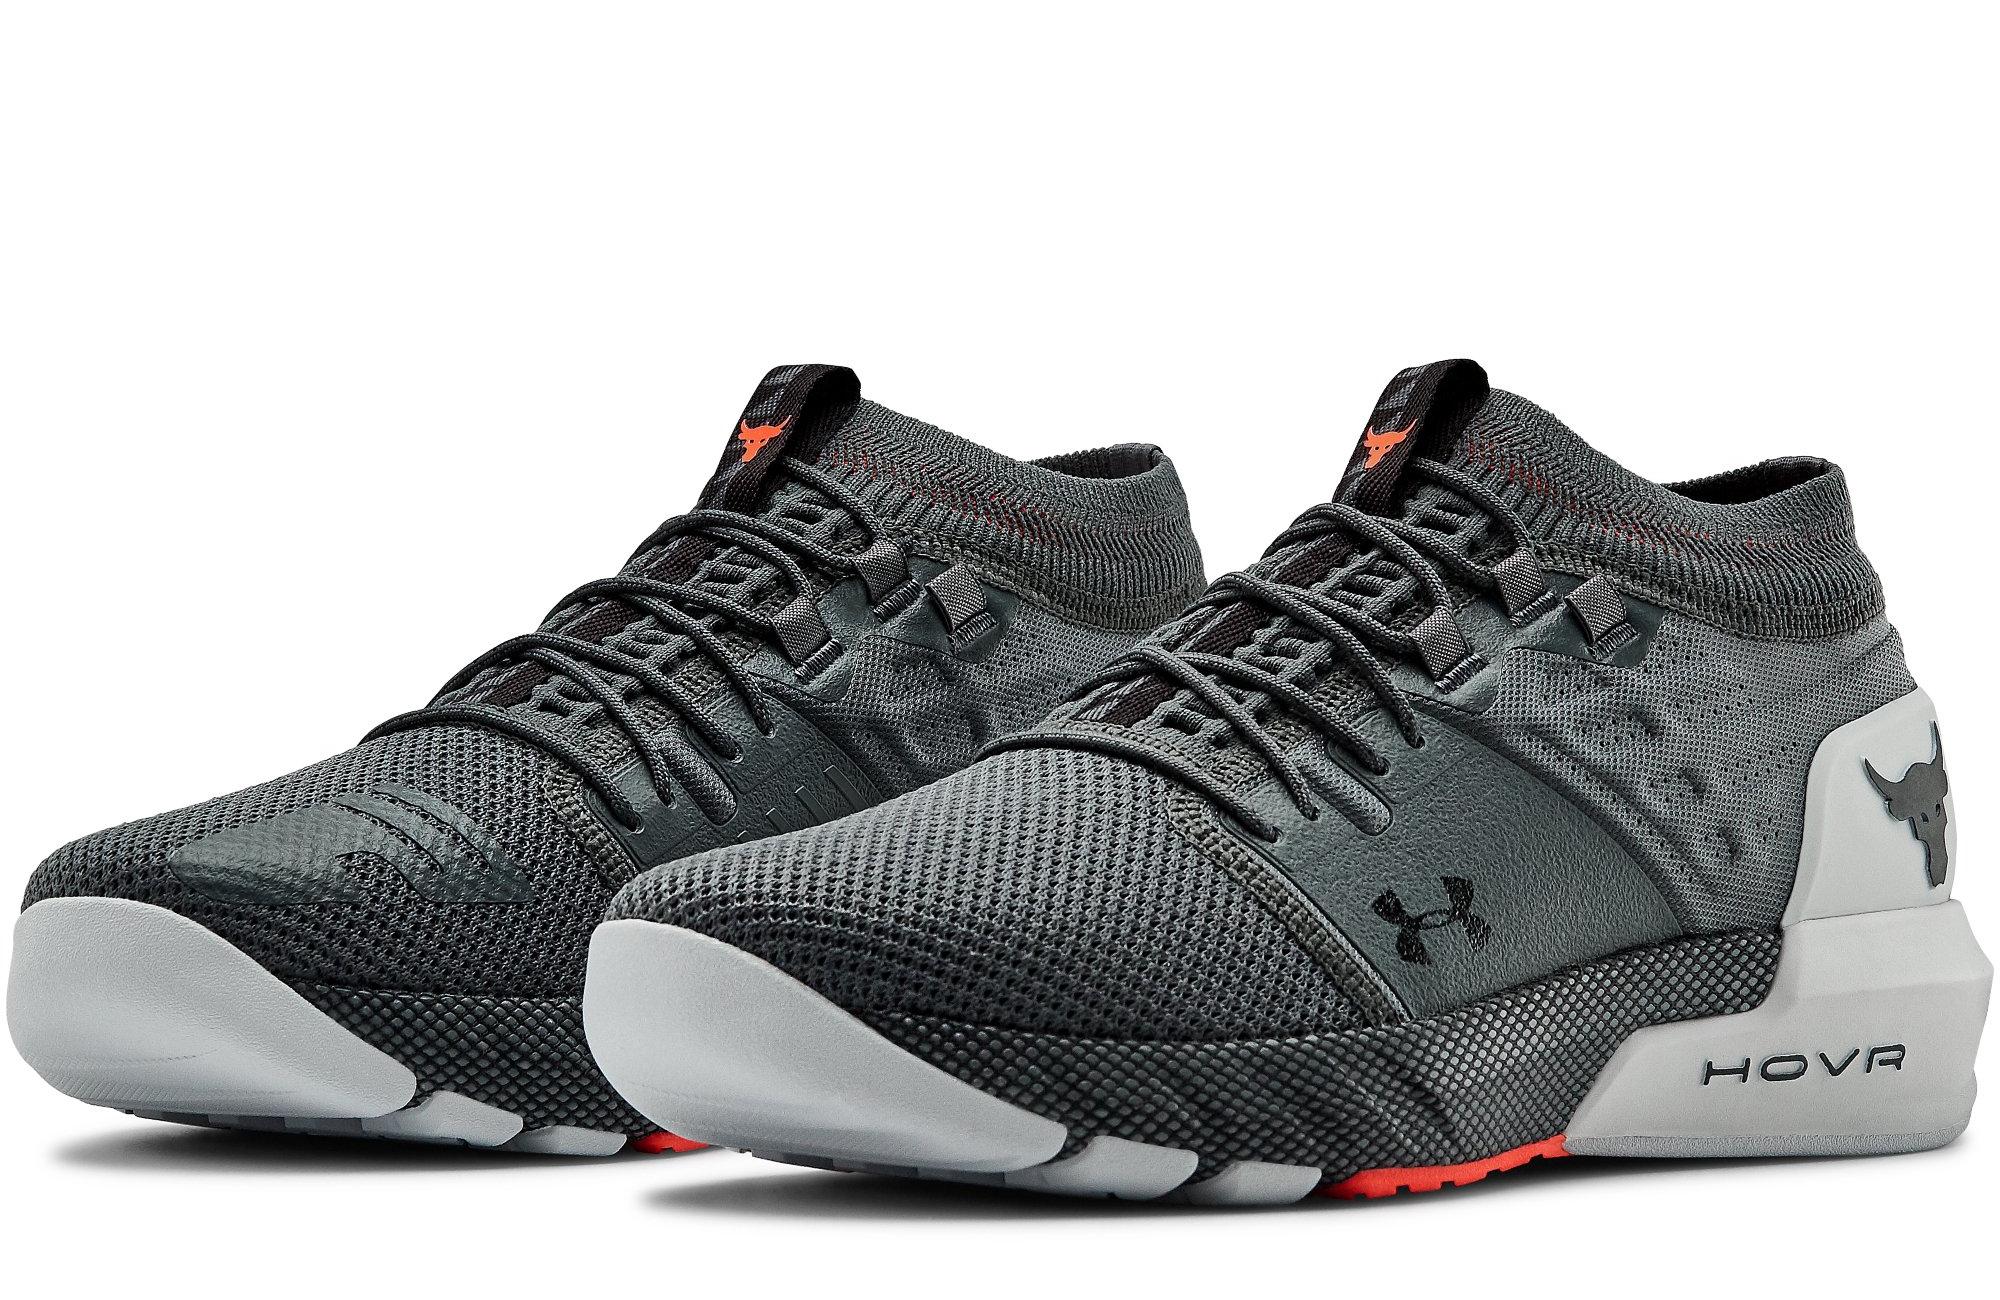 Sneakers Release – Under Armour Project Rock 2 “Grey/Red”  Men’s and Kids’ Training Shoe